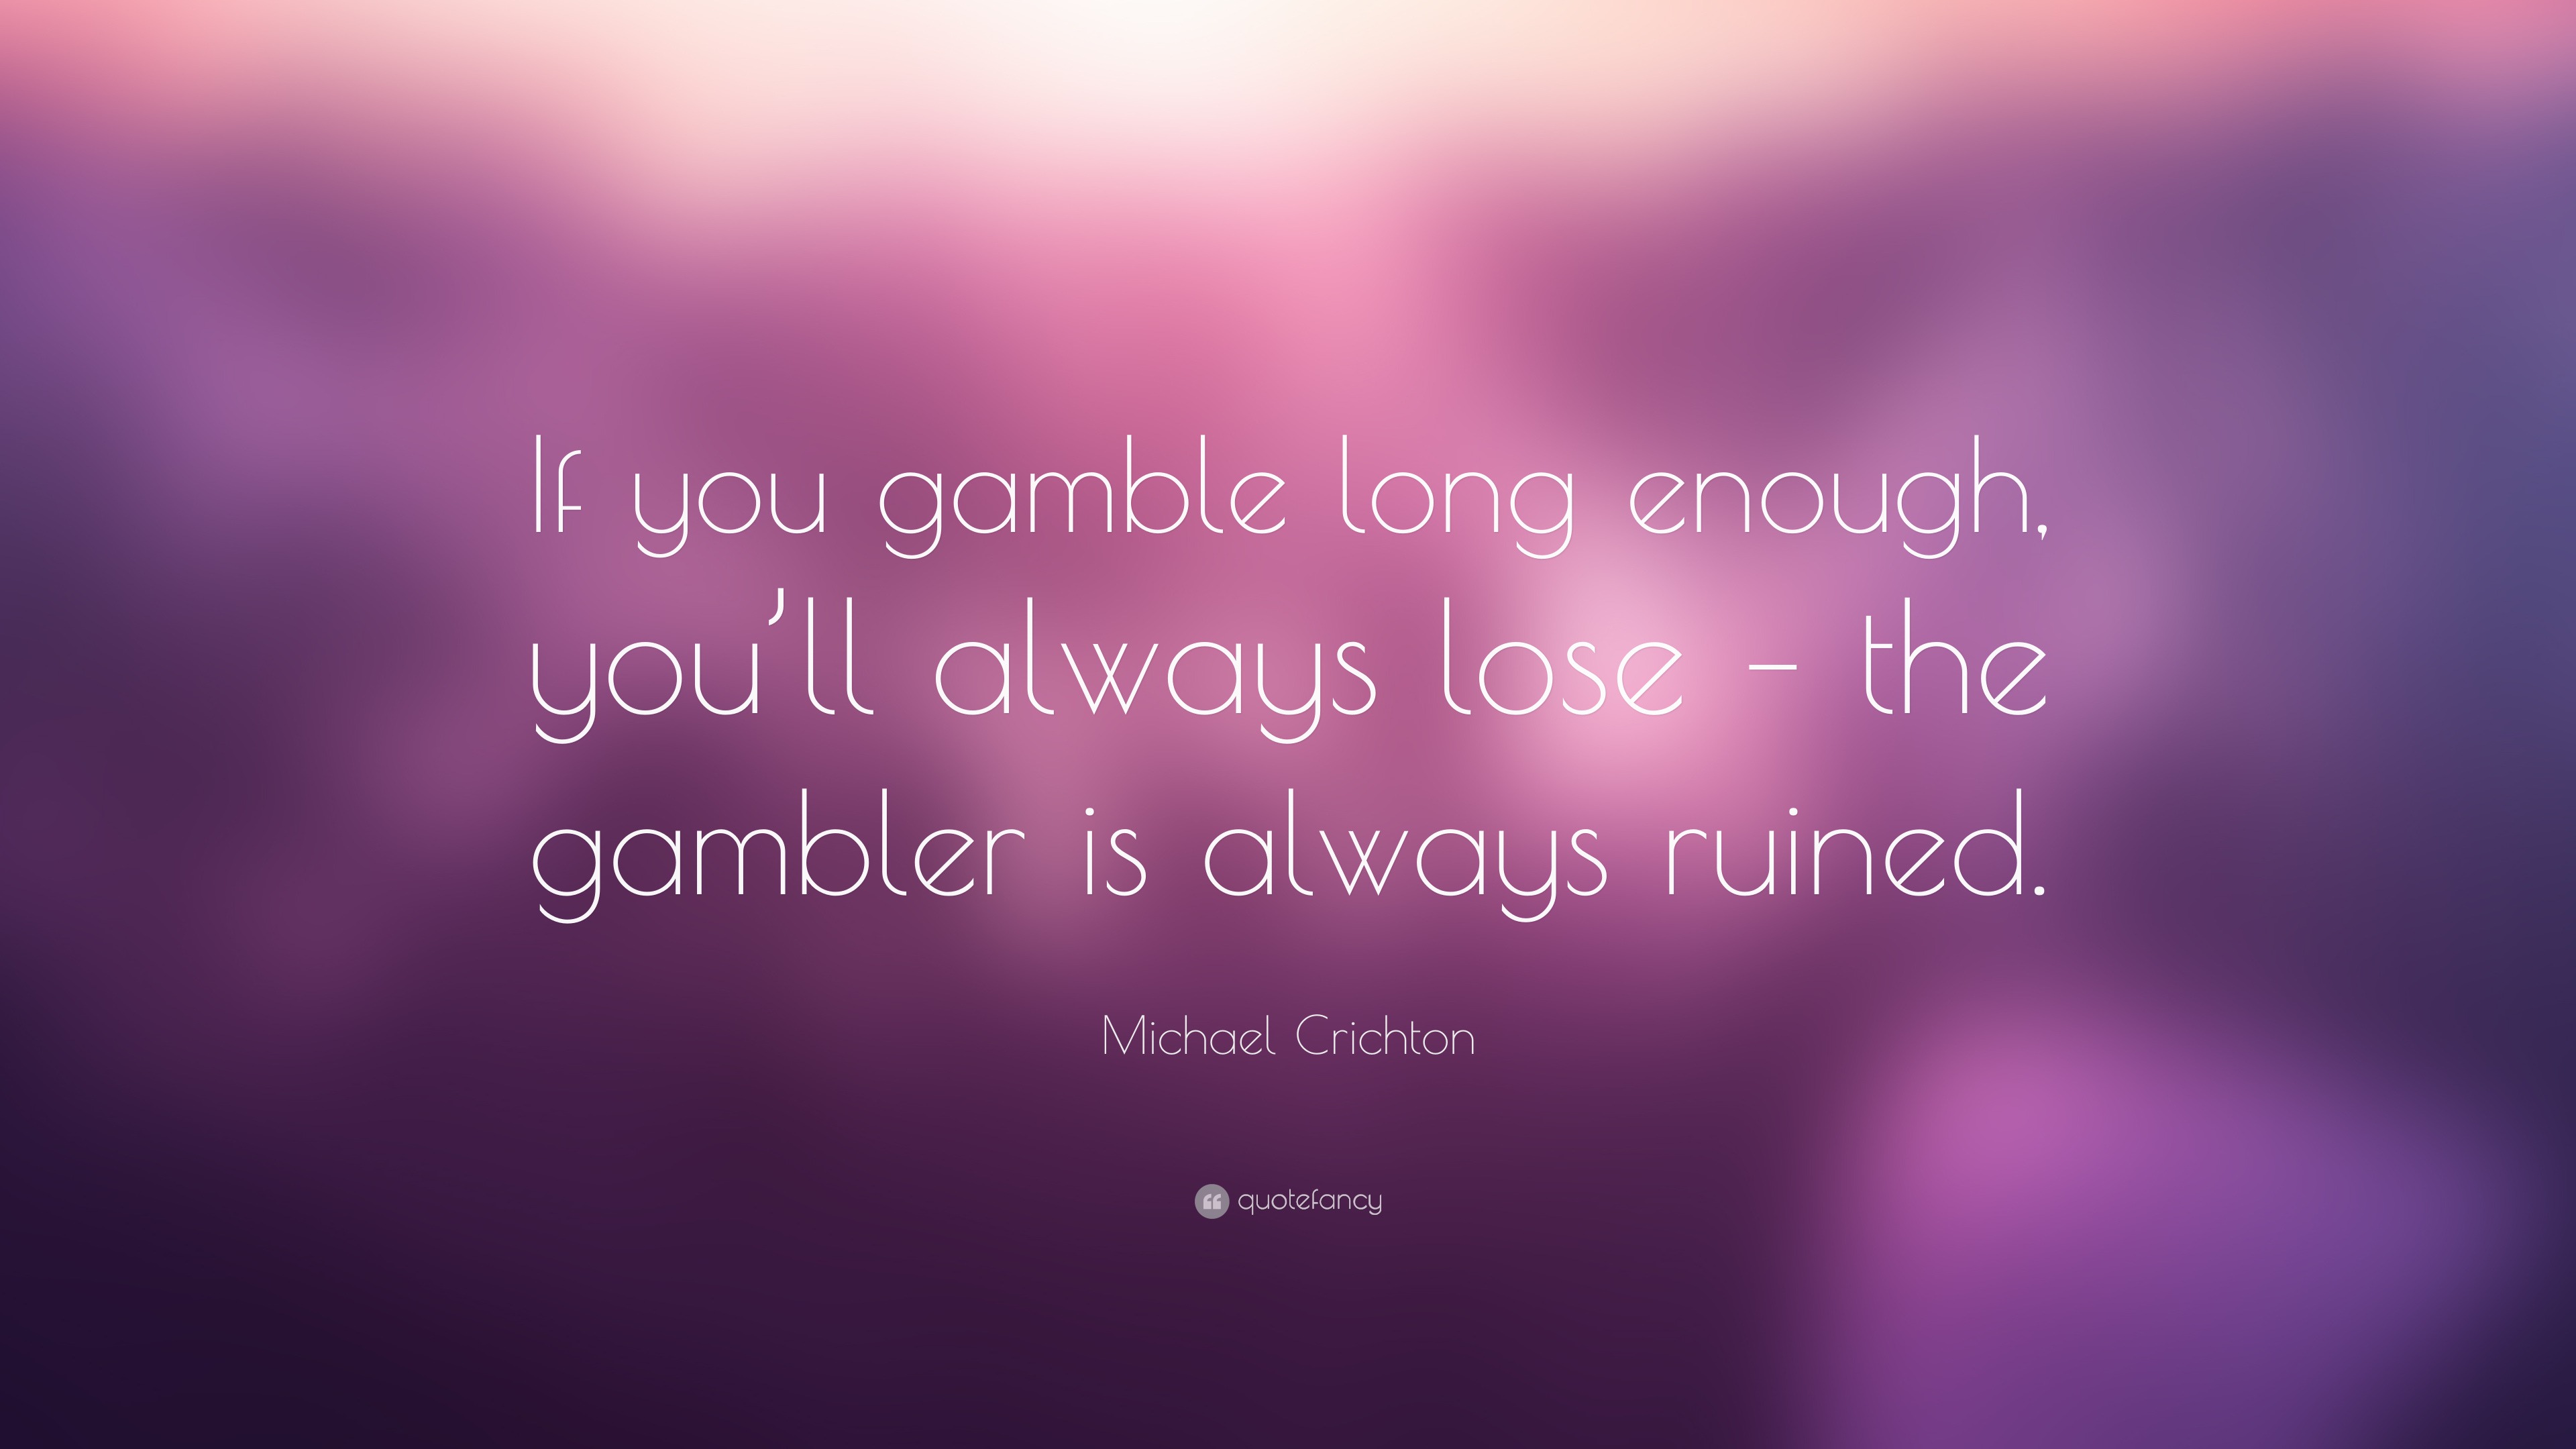 Whenever you gamble my friend, eventually you'll lose. - MagicalQuote